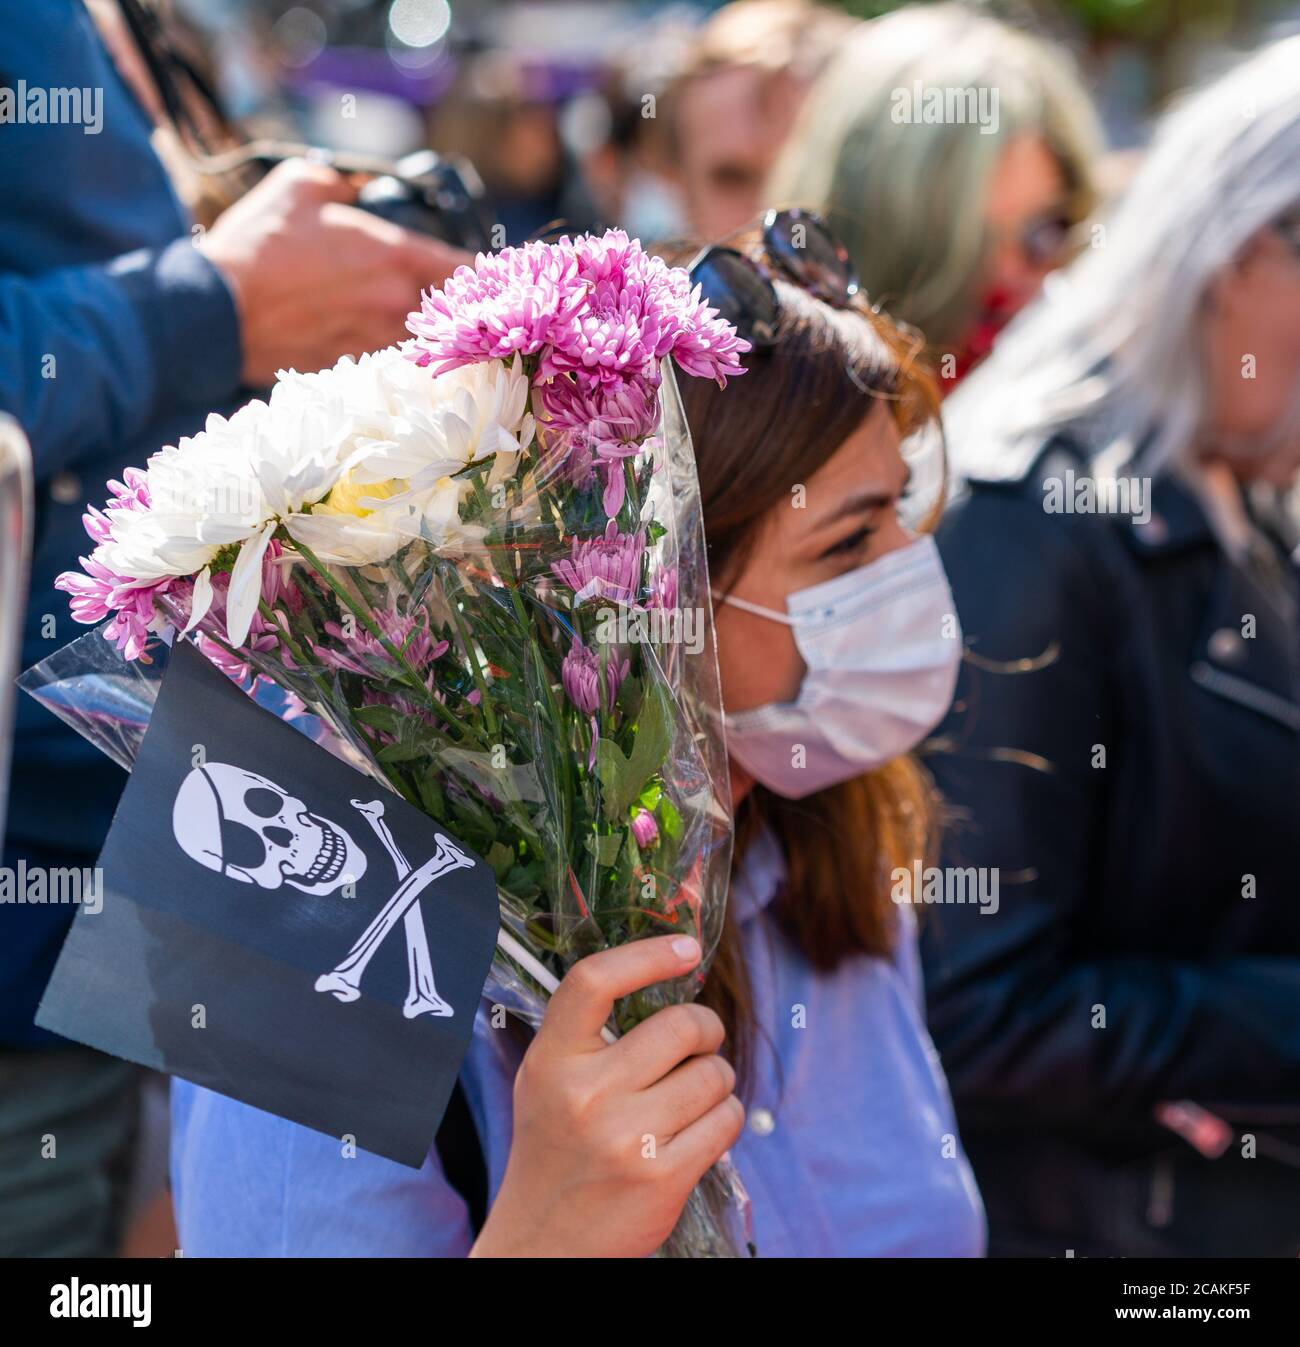 LONDON, ENGLAND - JULY 28, 2020: Beautiful female Johnny Depp fan outside the High Court  wearing a face mask during the Court case against The Sun Ne Stock Photo